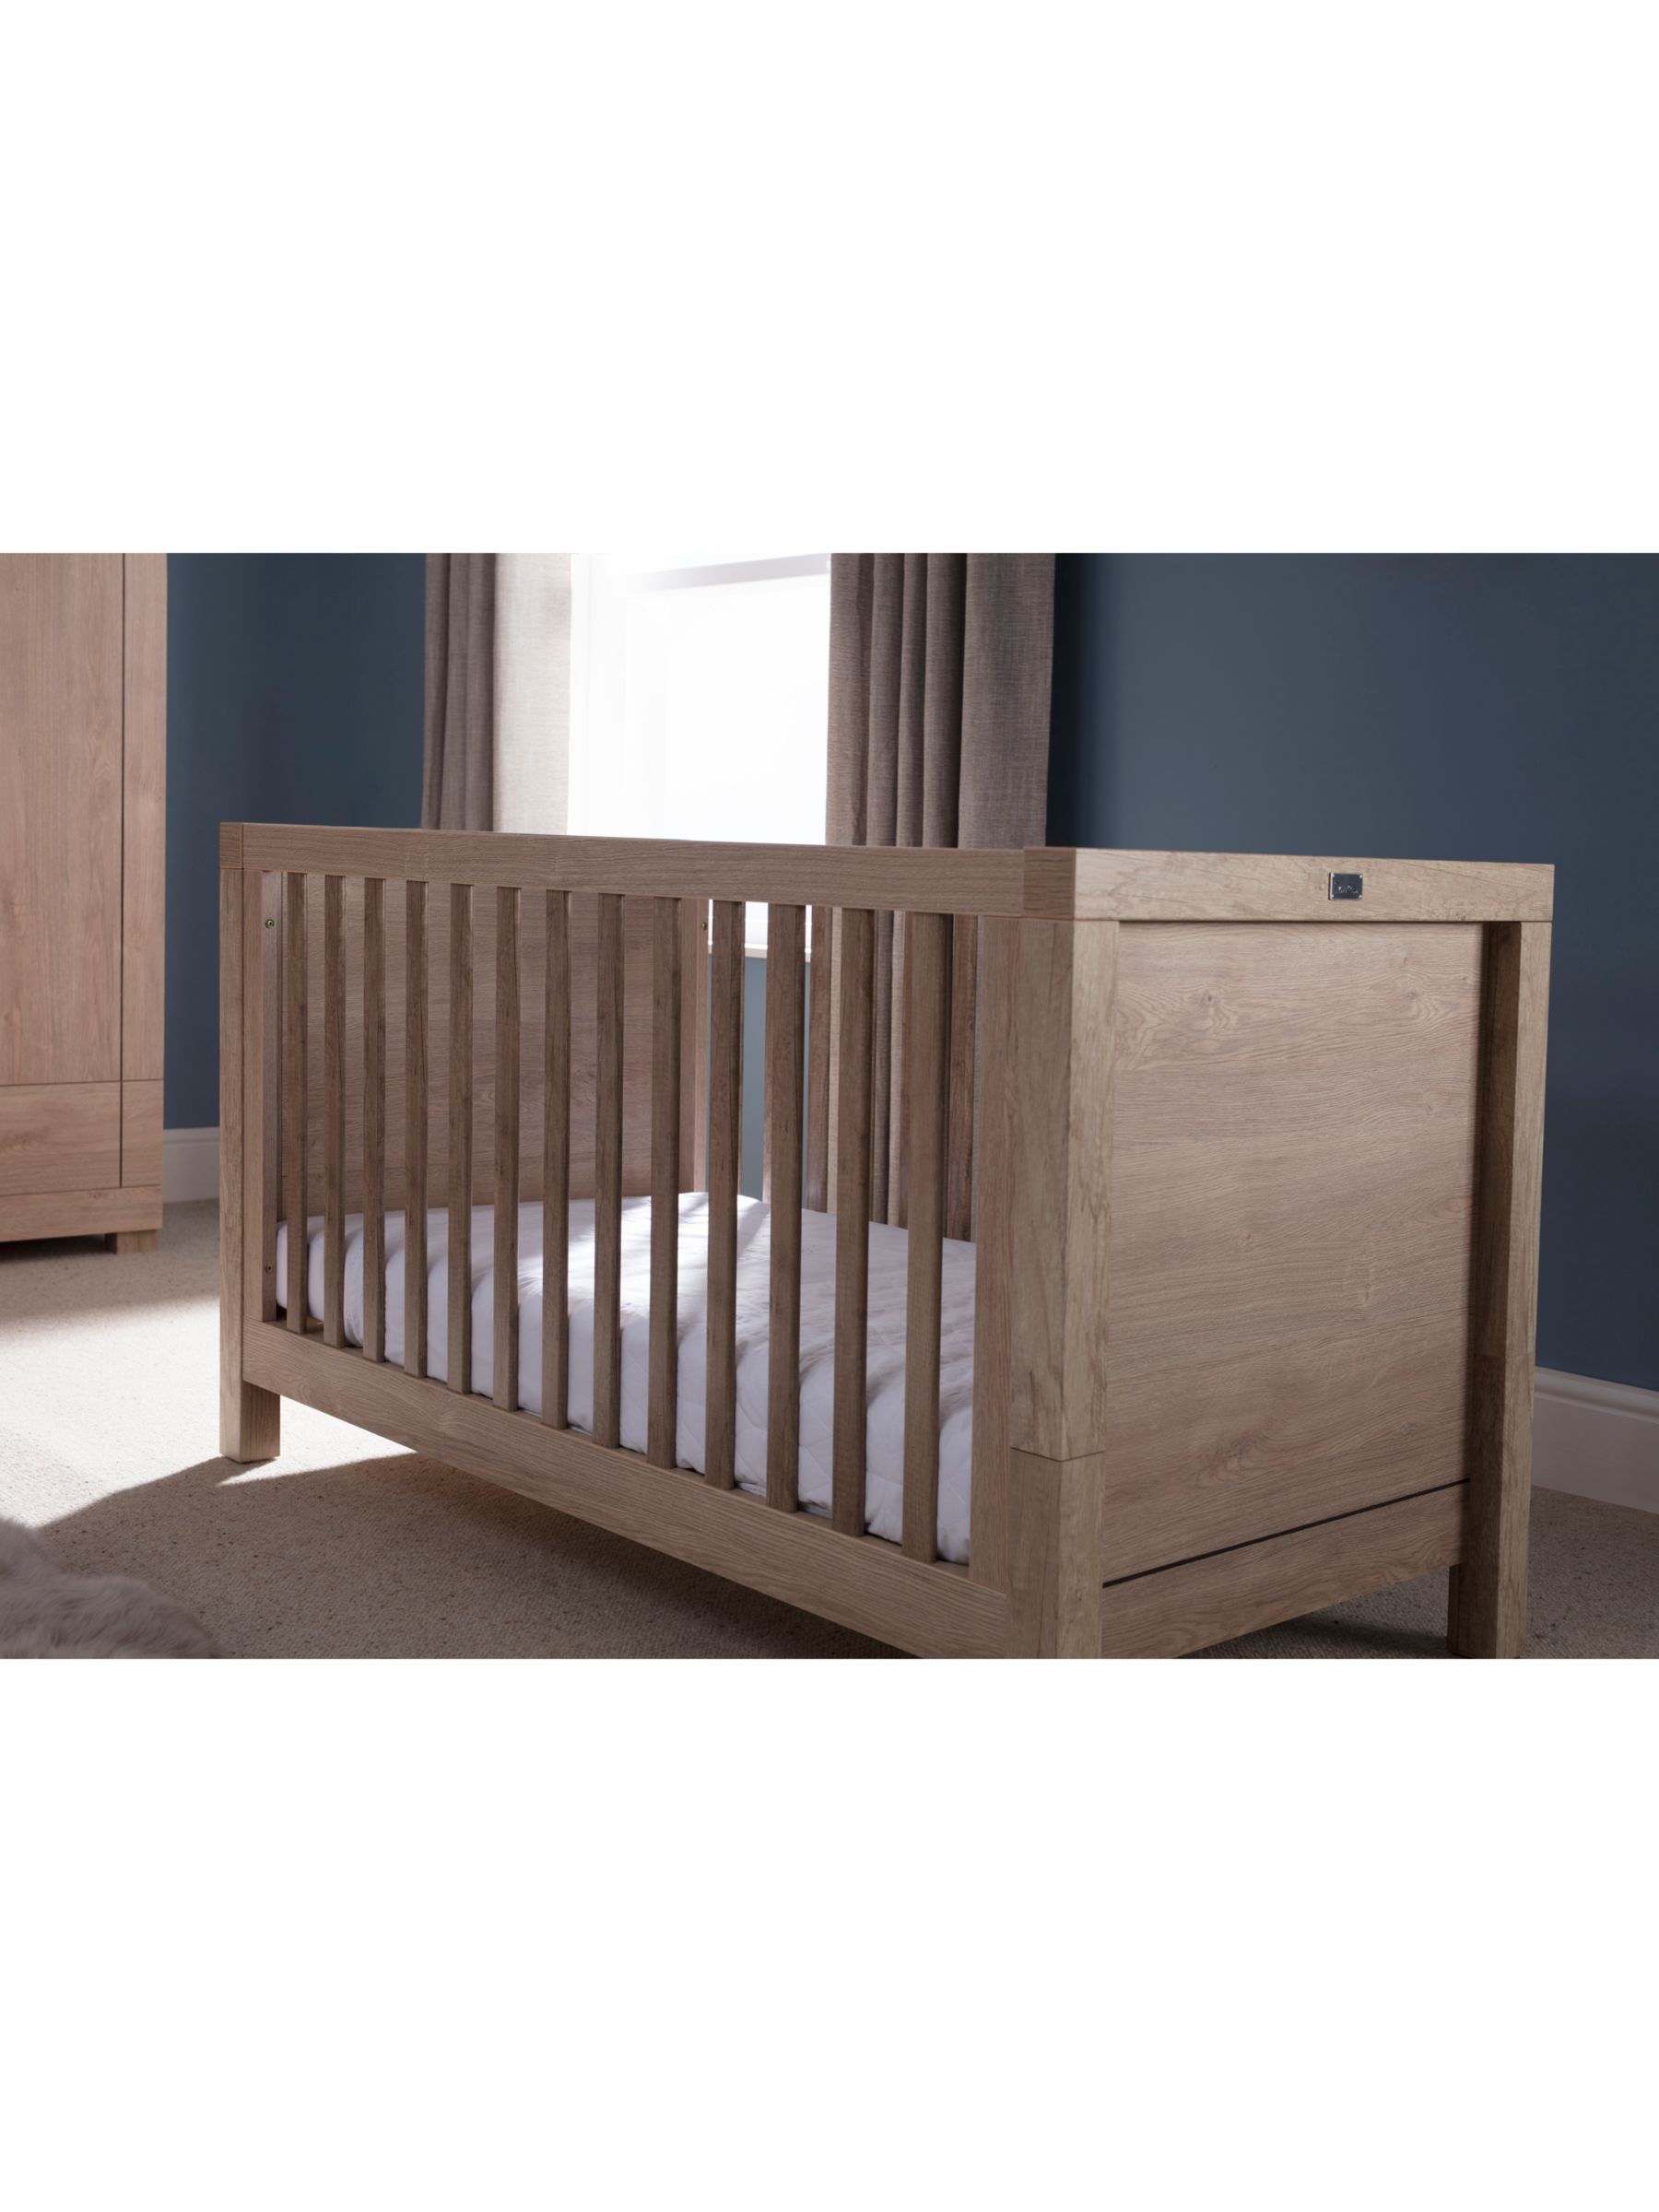 discount baby cribs for sale